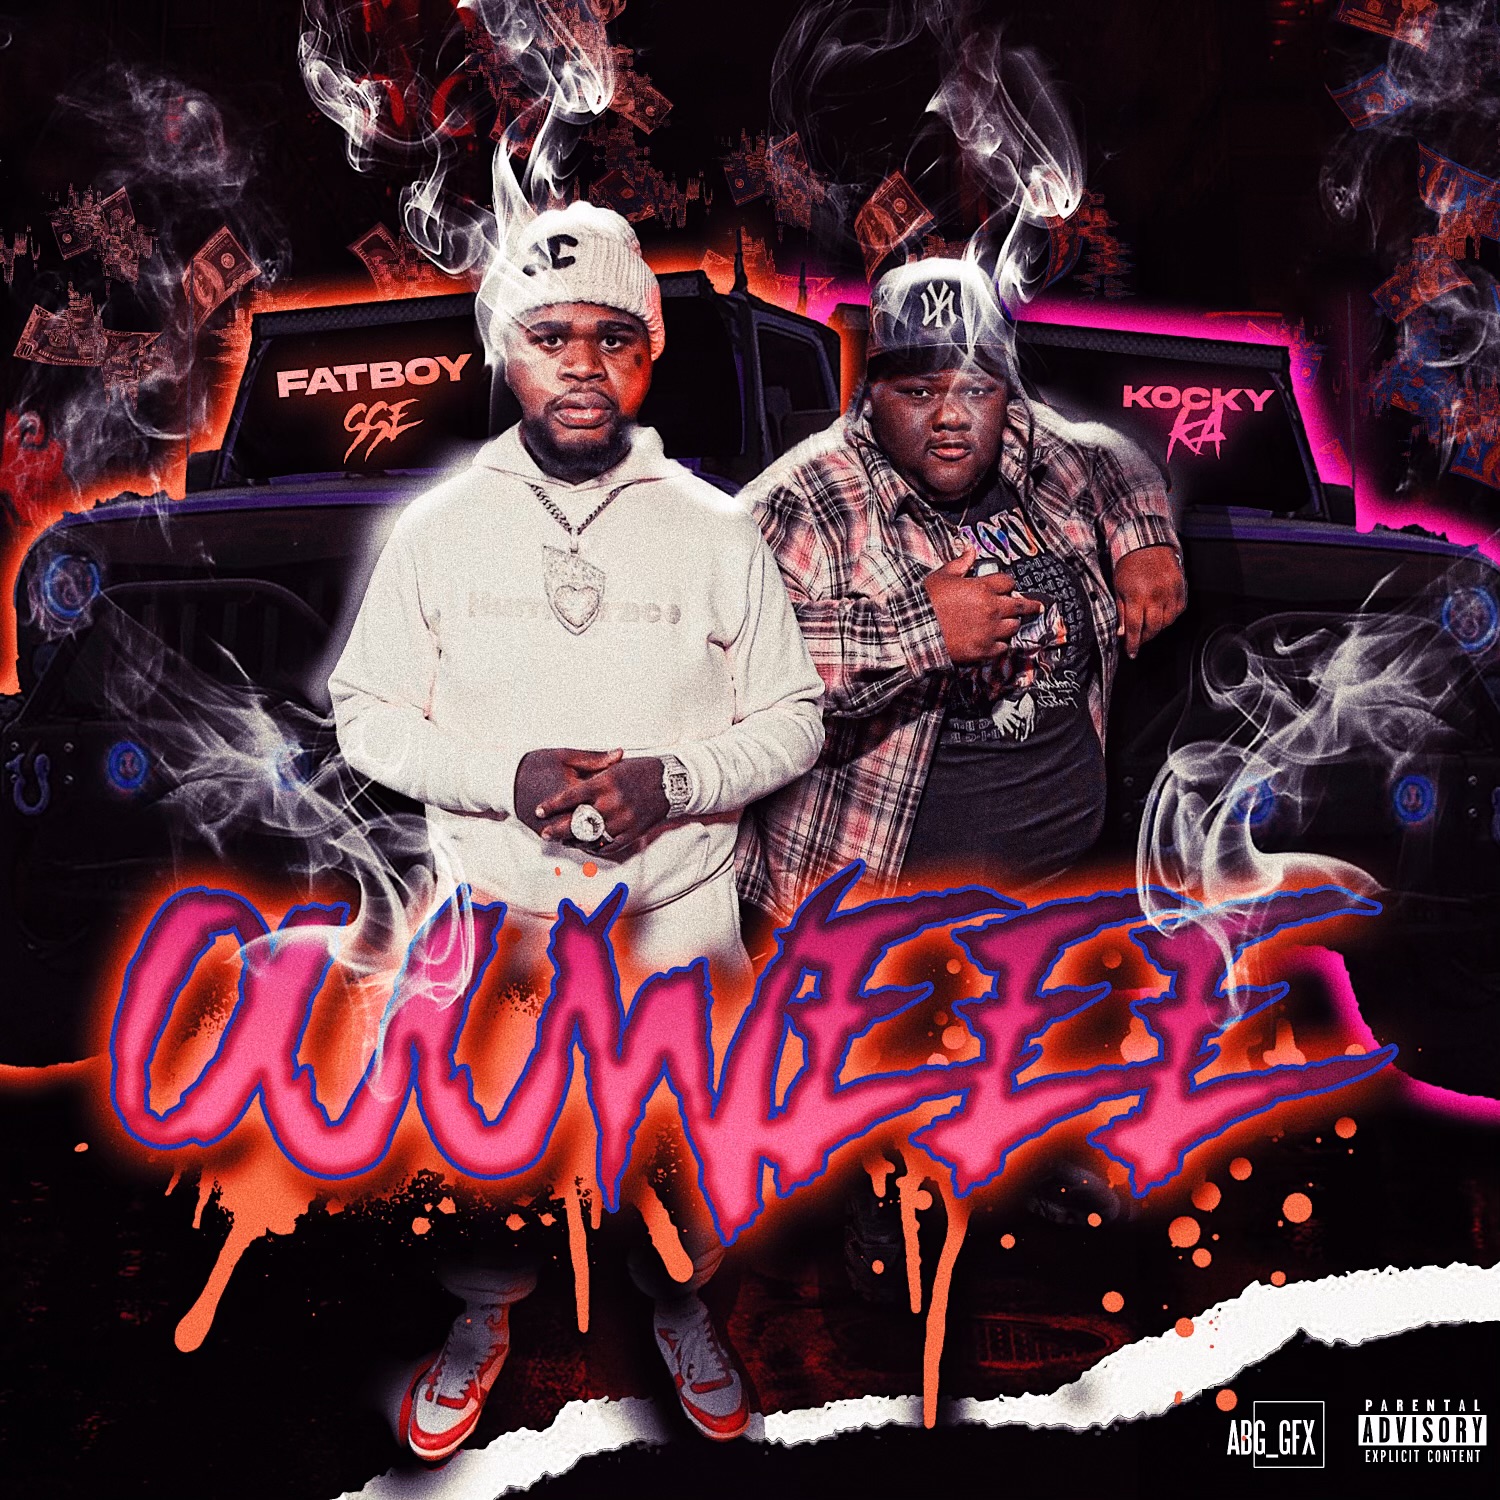 Fatboy Reflects On His Journey In New Single “OUUWEEE” [LISTEN]